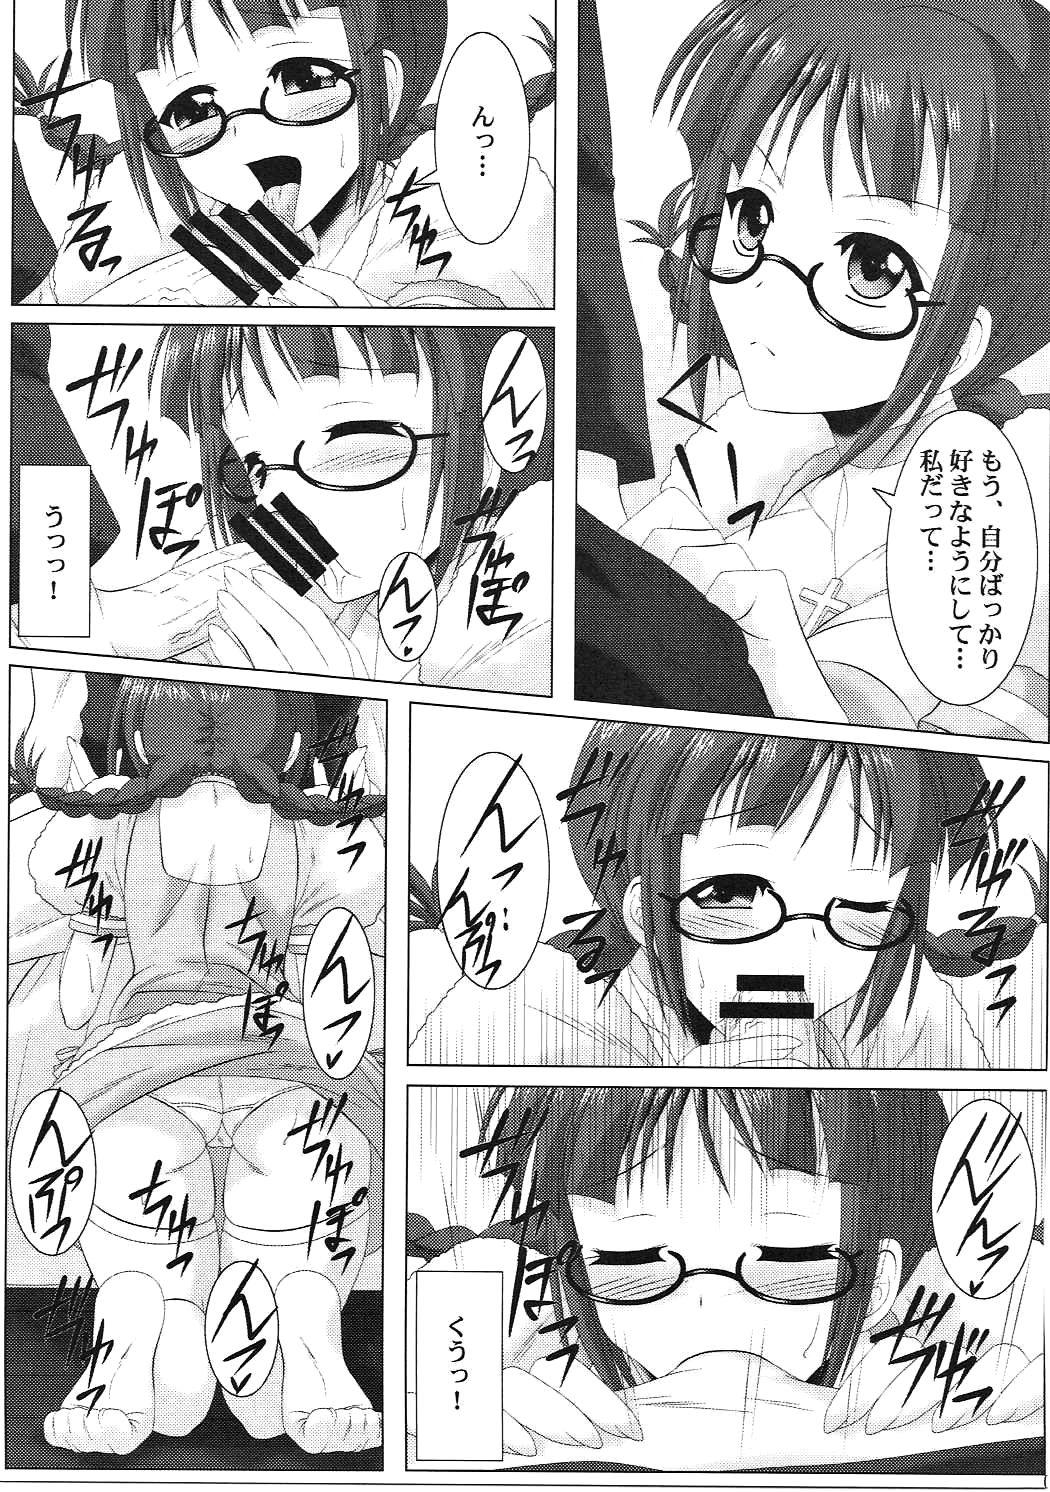 Nice Tits Ritsuko-Ism - The idolmaster Delicia - Page 8